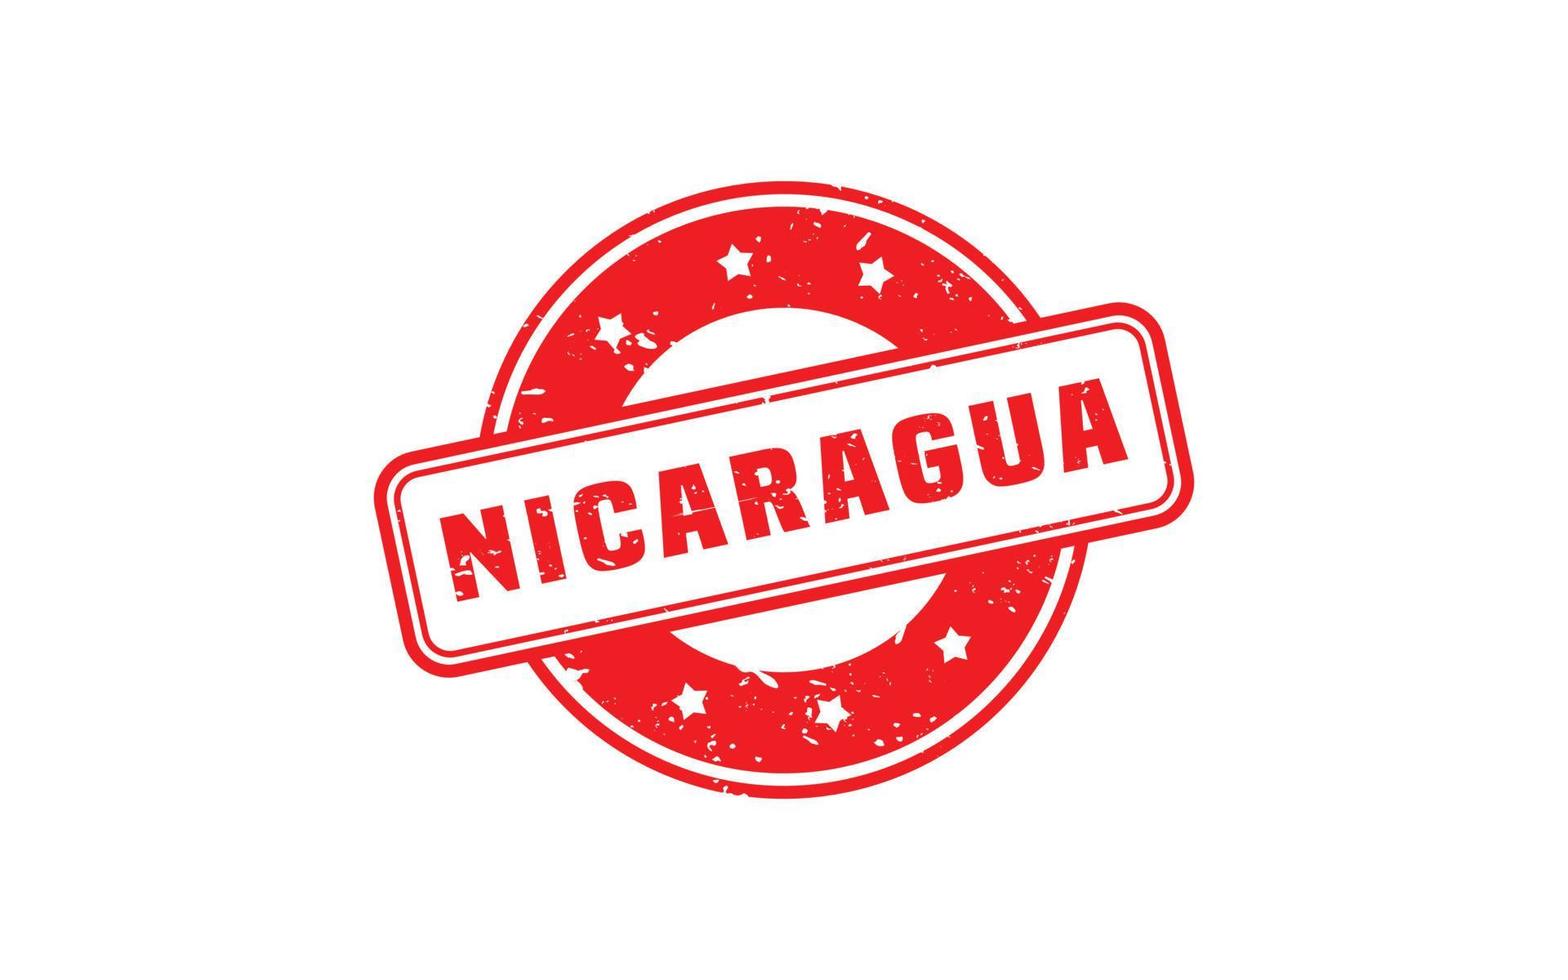 NICARAGUA stamp rubber with grunge style on white background vector